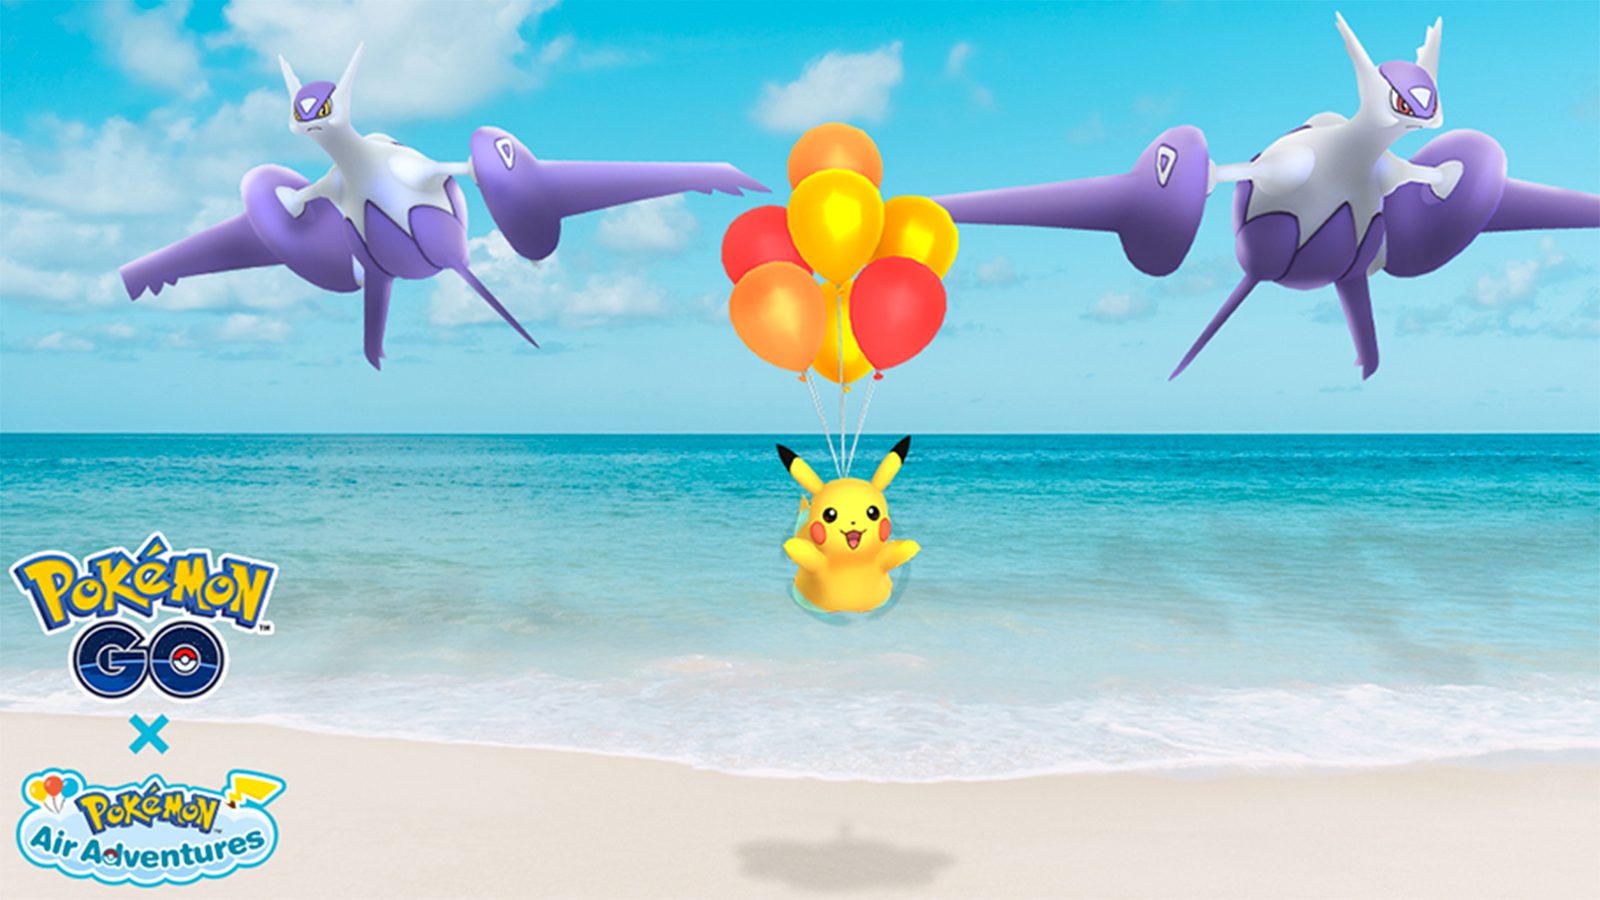 A poster for Pokemon Go Air Adventures event